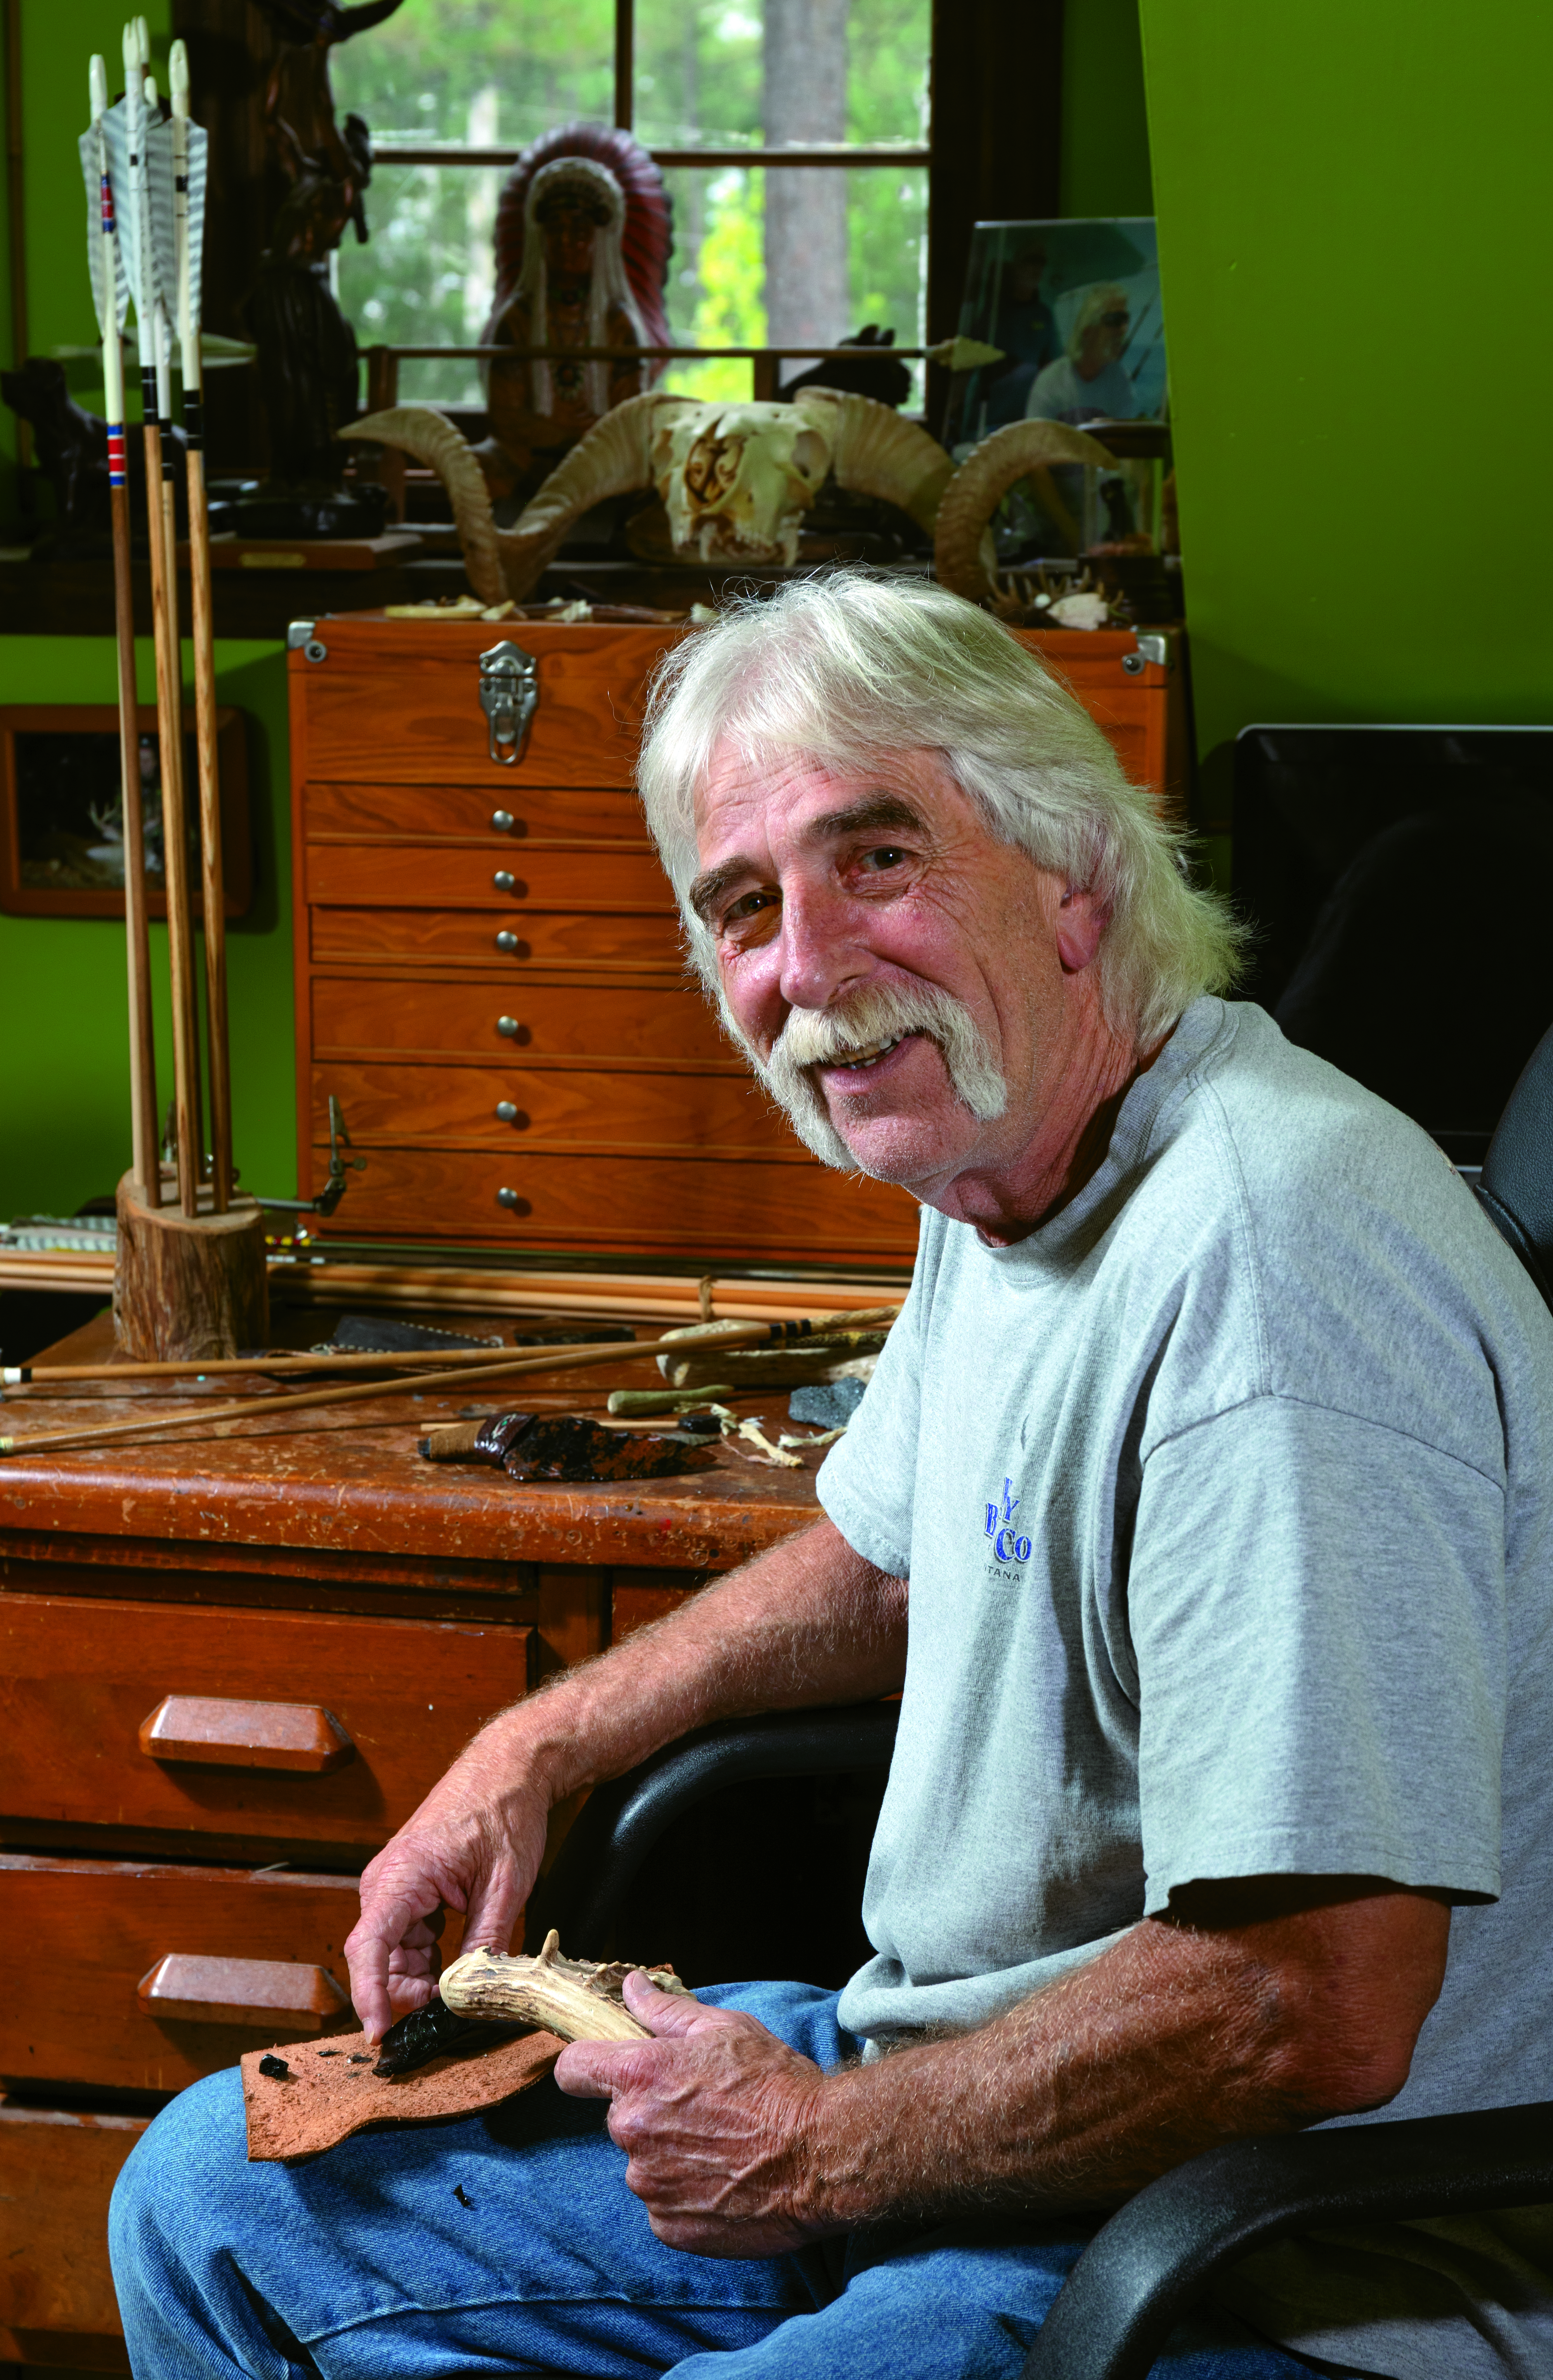 Marty Daughtry has been harvesting game with his own arrows and arrowheads for 20 years.
